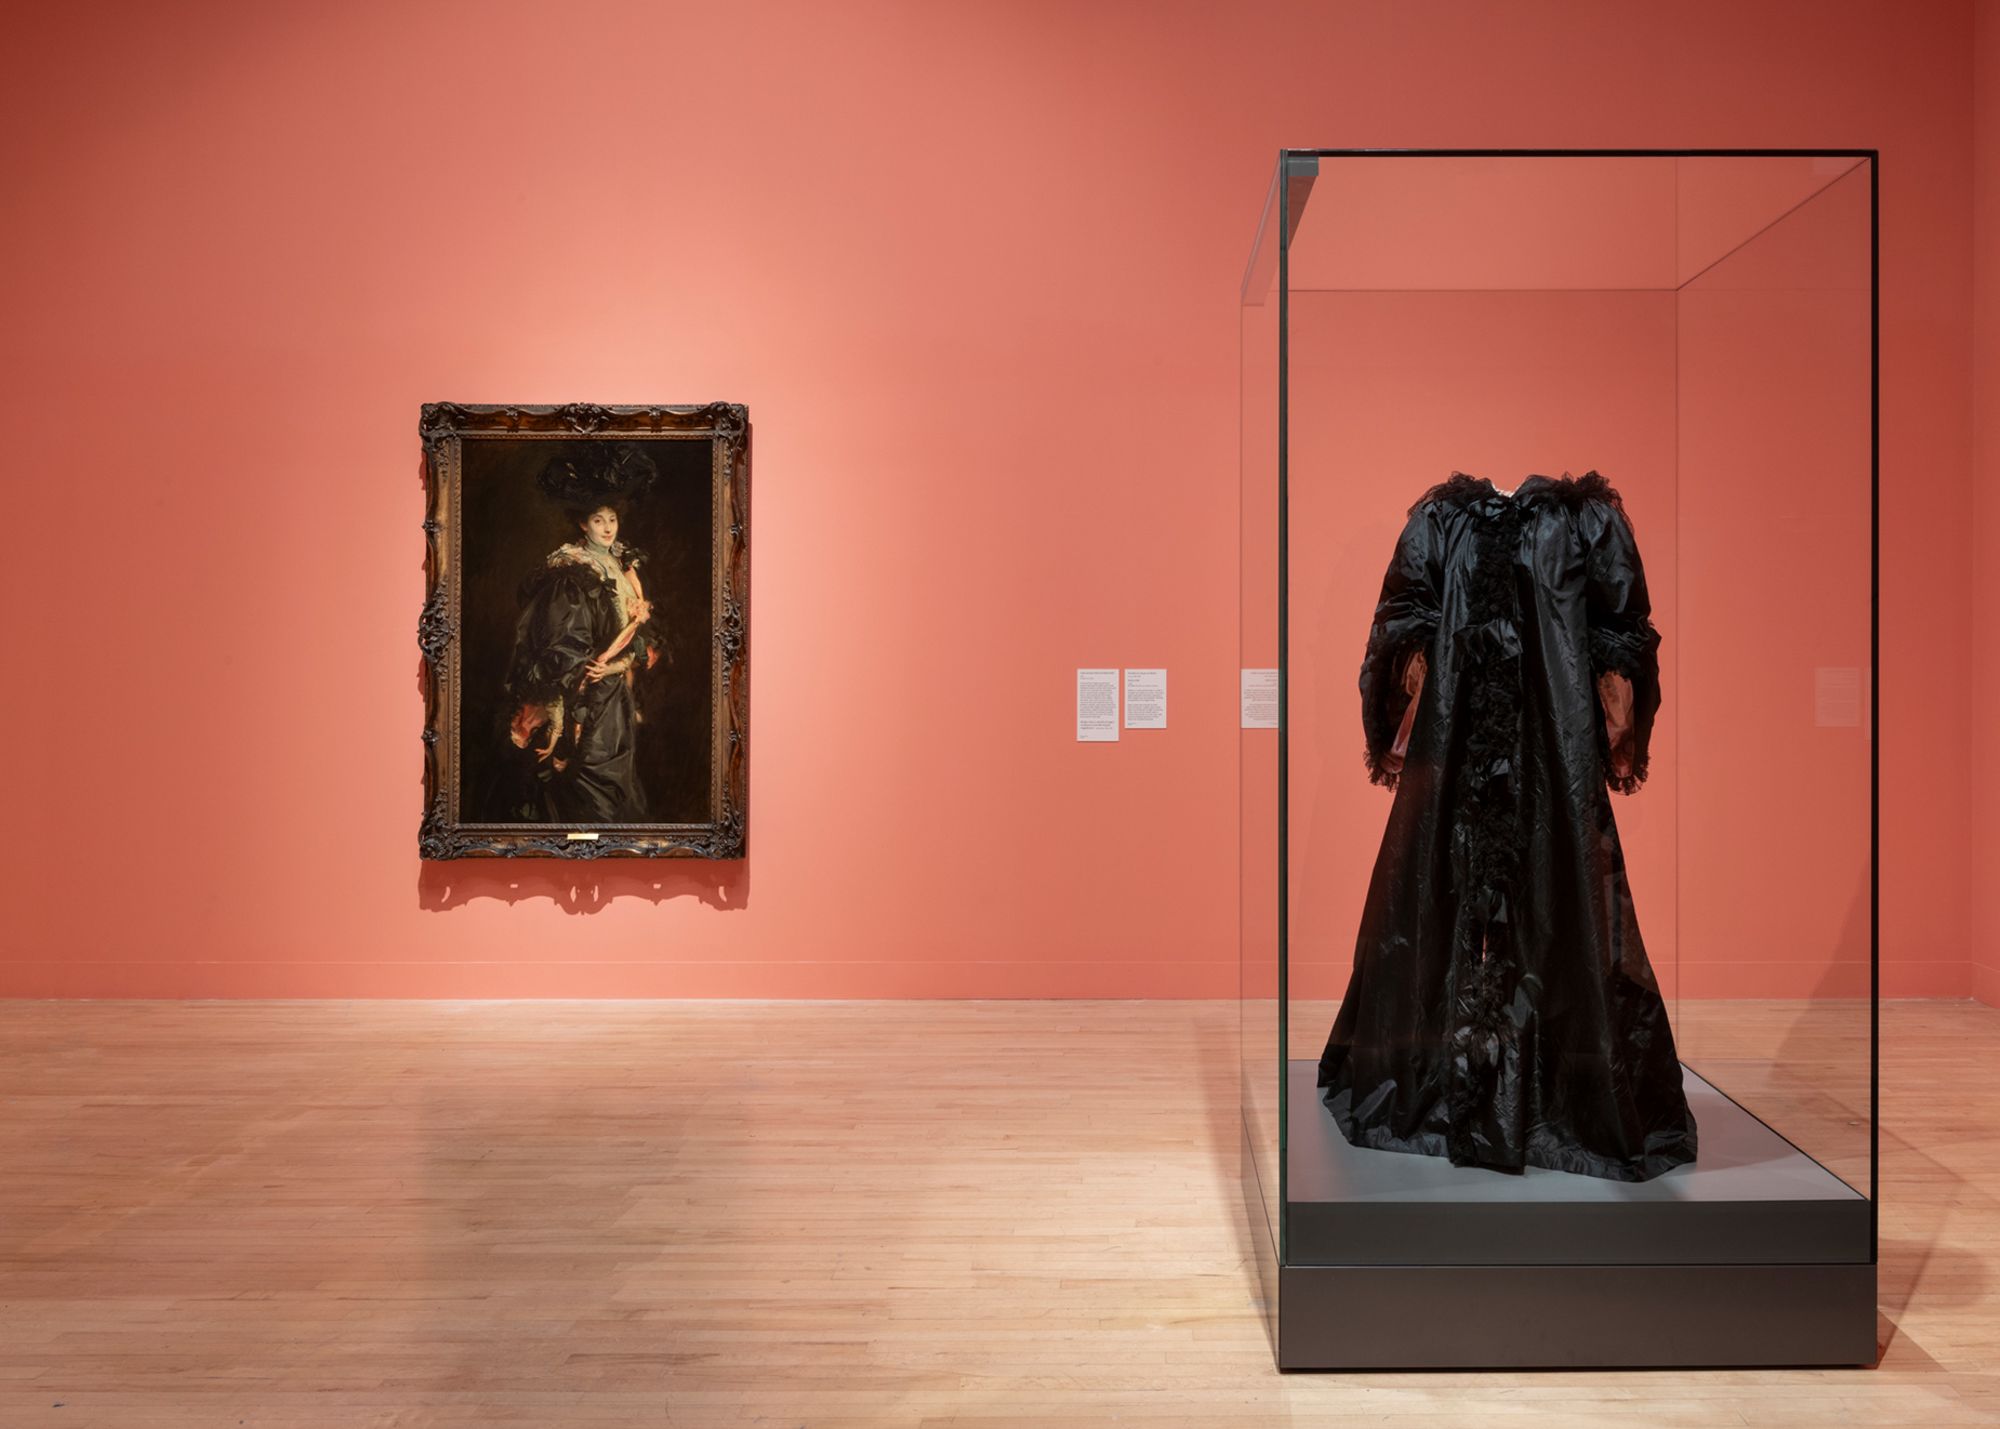 A new exhibition at London's Tate Britain explores a previously overlooked relationship between John Singer Sargent and couture fashion.